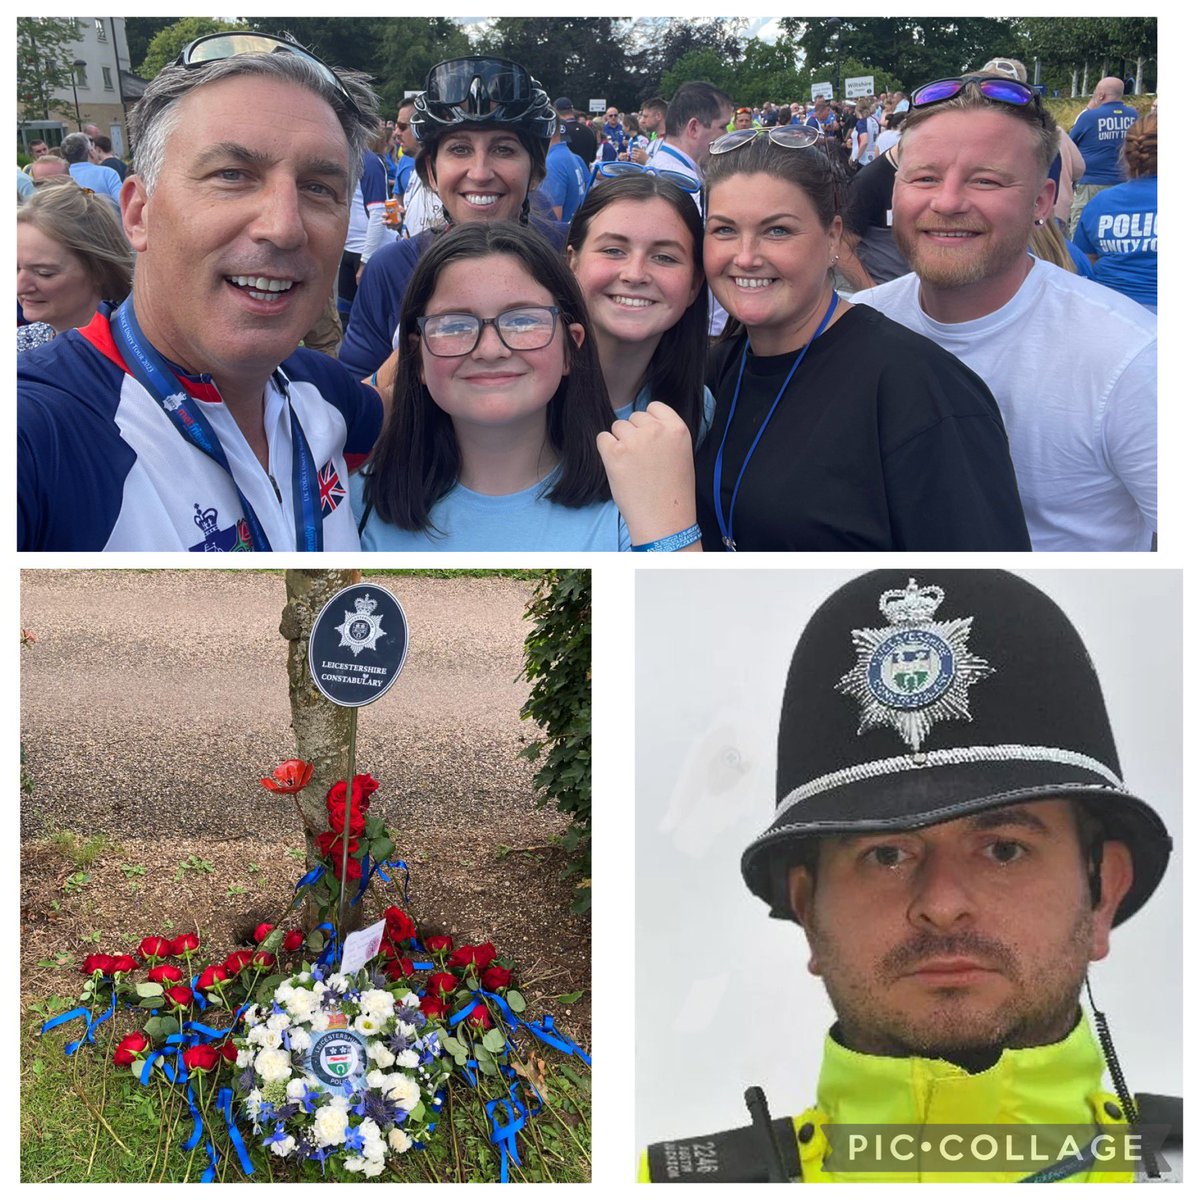 Proud to ride the @PolUnityTourUK in memory of PC Austin Jackson. Always emotional catching up with his family & handing over the band that is inscribed with his name. Austin was a much loved officer & worked in the #stmatthews @LPEastLeics. @leicspolice